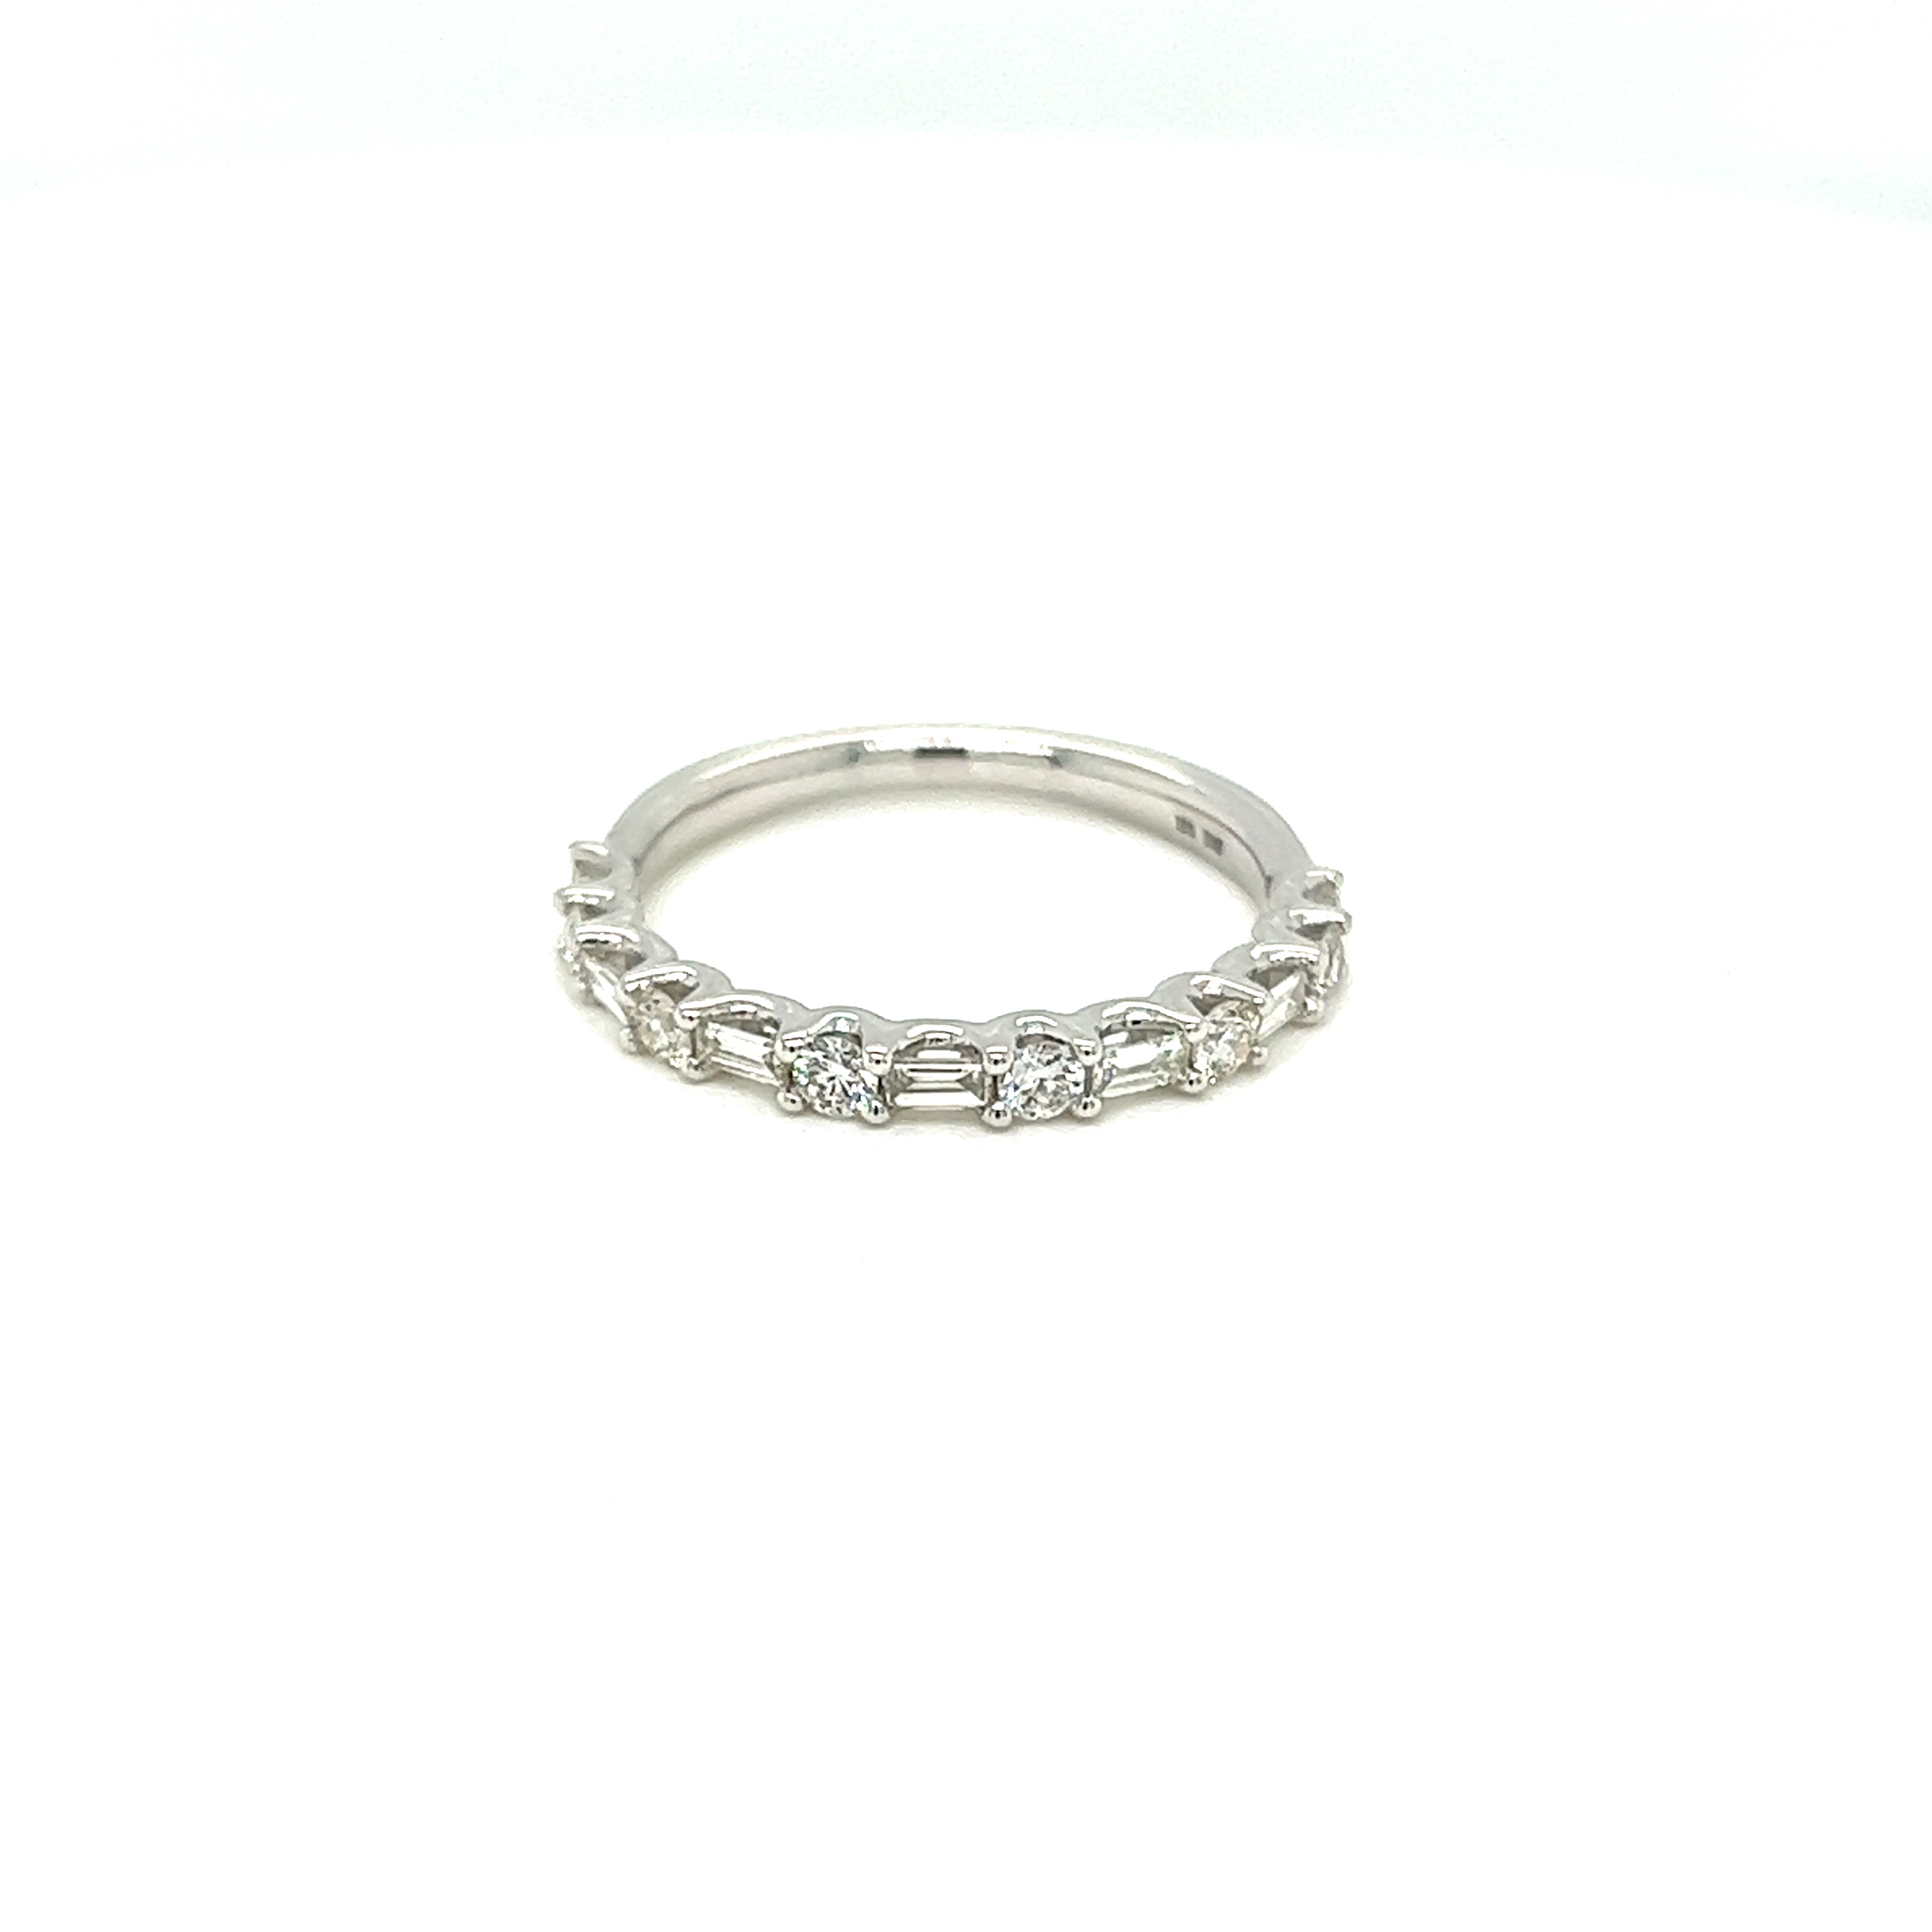 14 Karat white gold wedding band Size 6.25 with 7 baguette diamonds and 6 round brilliant diamonds with total carat weight of .50 with G color and VS clarity.